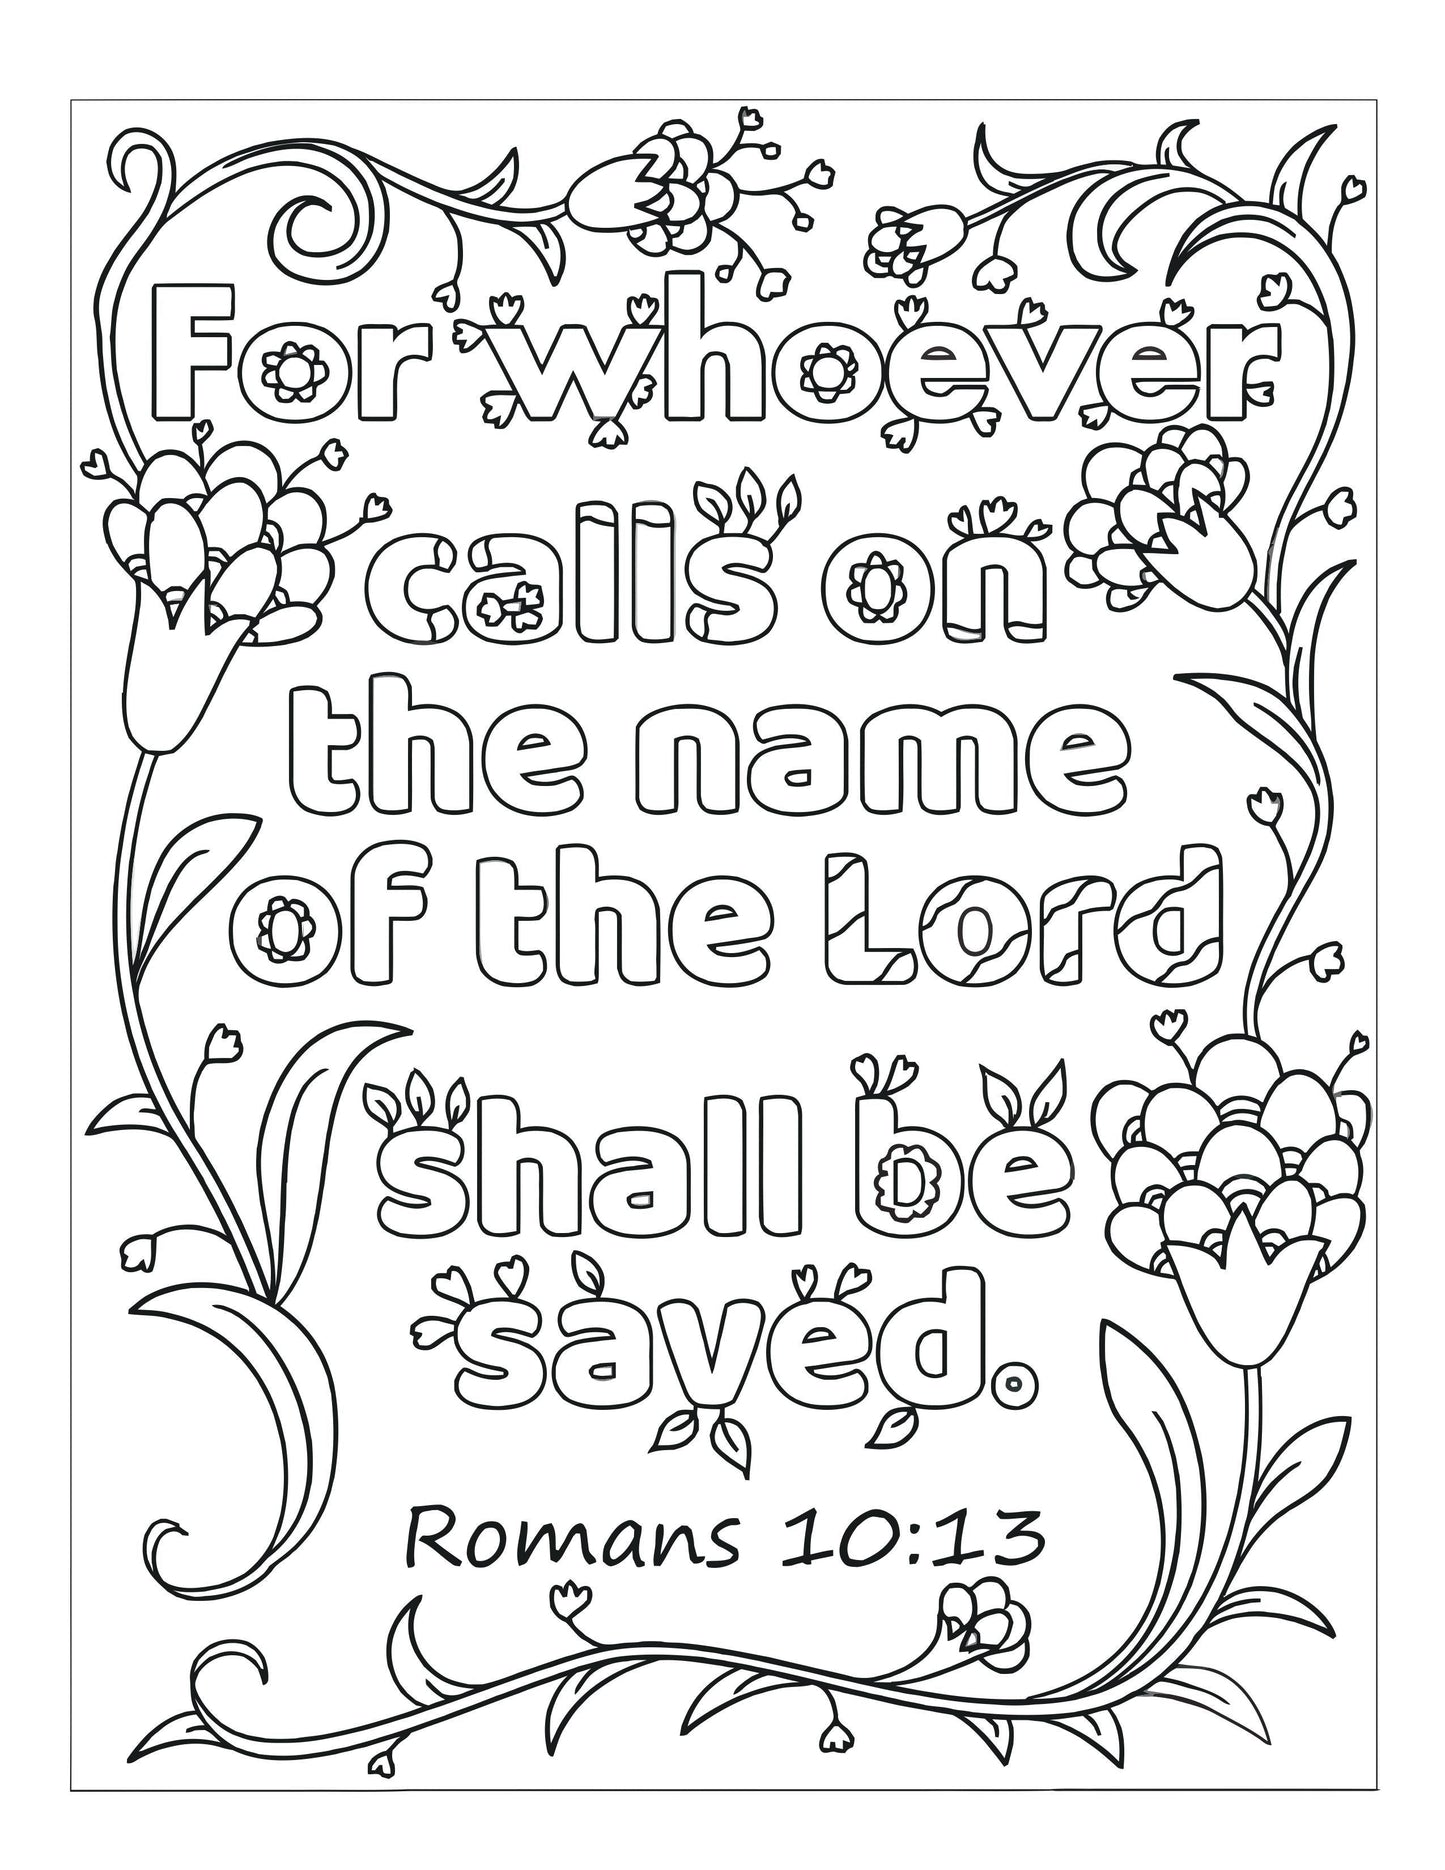 Bible Memory Verse Coloring Book (31 Pages) download only - Sunday School Store 